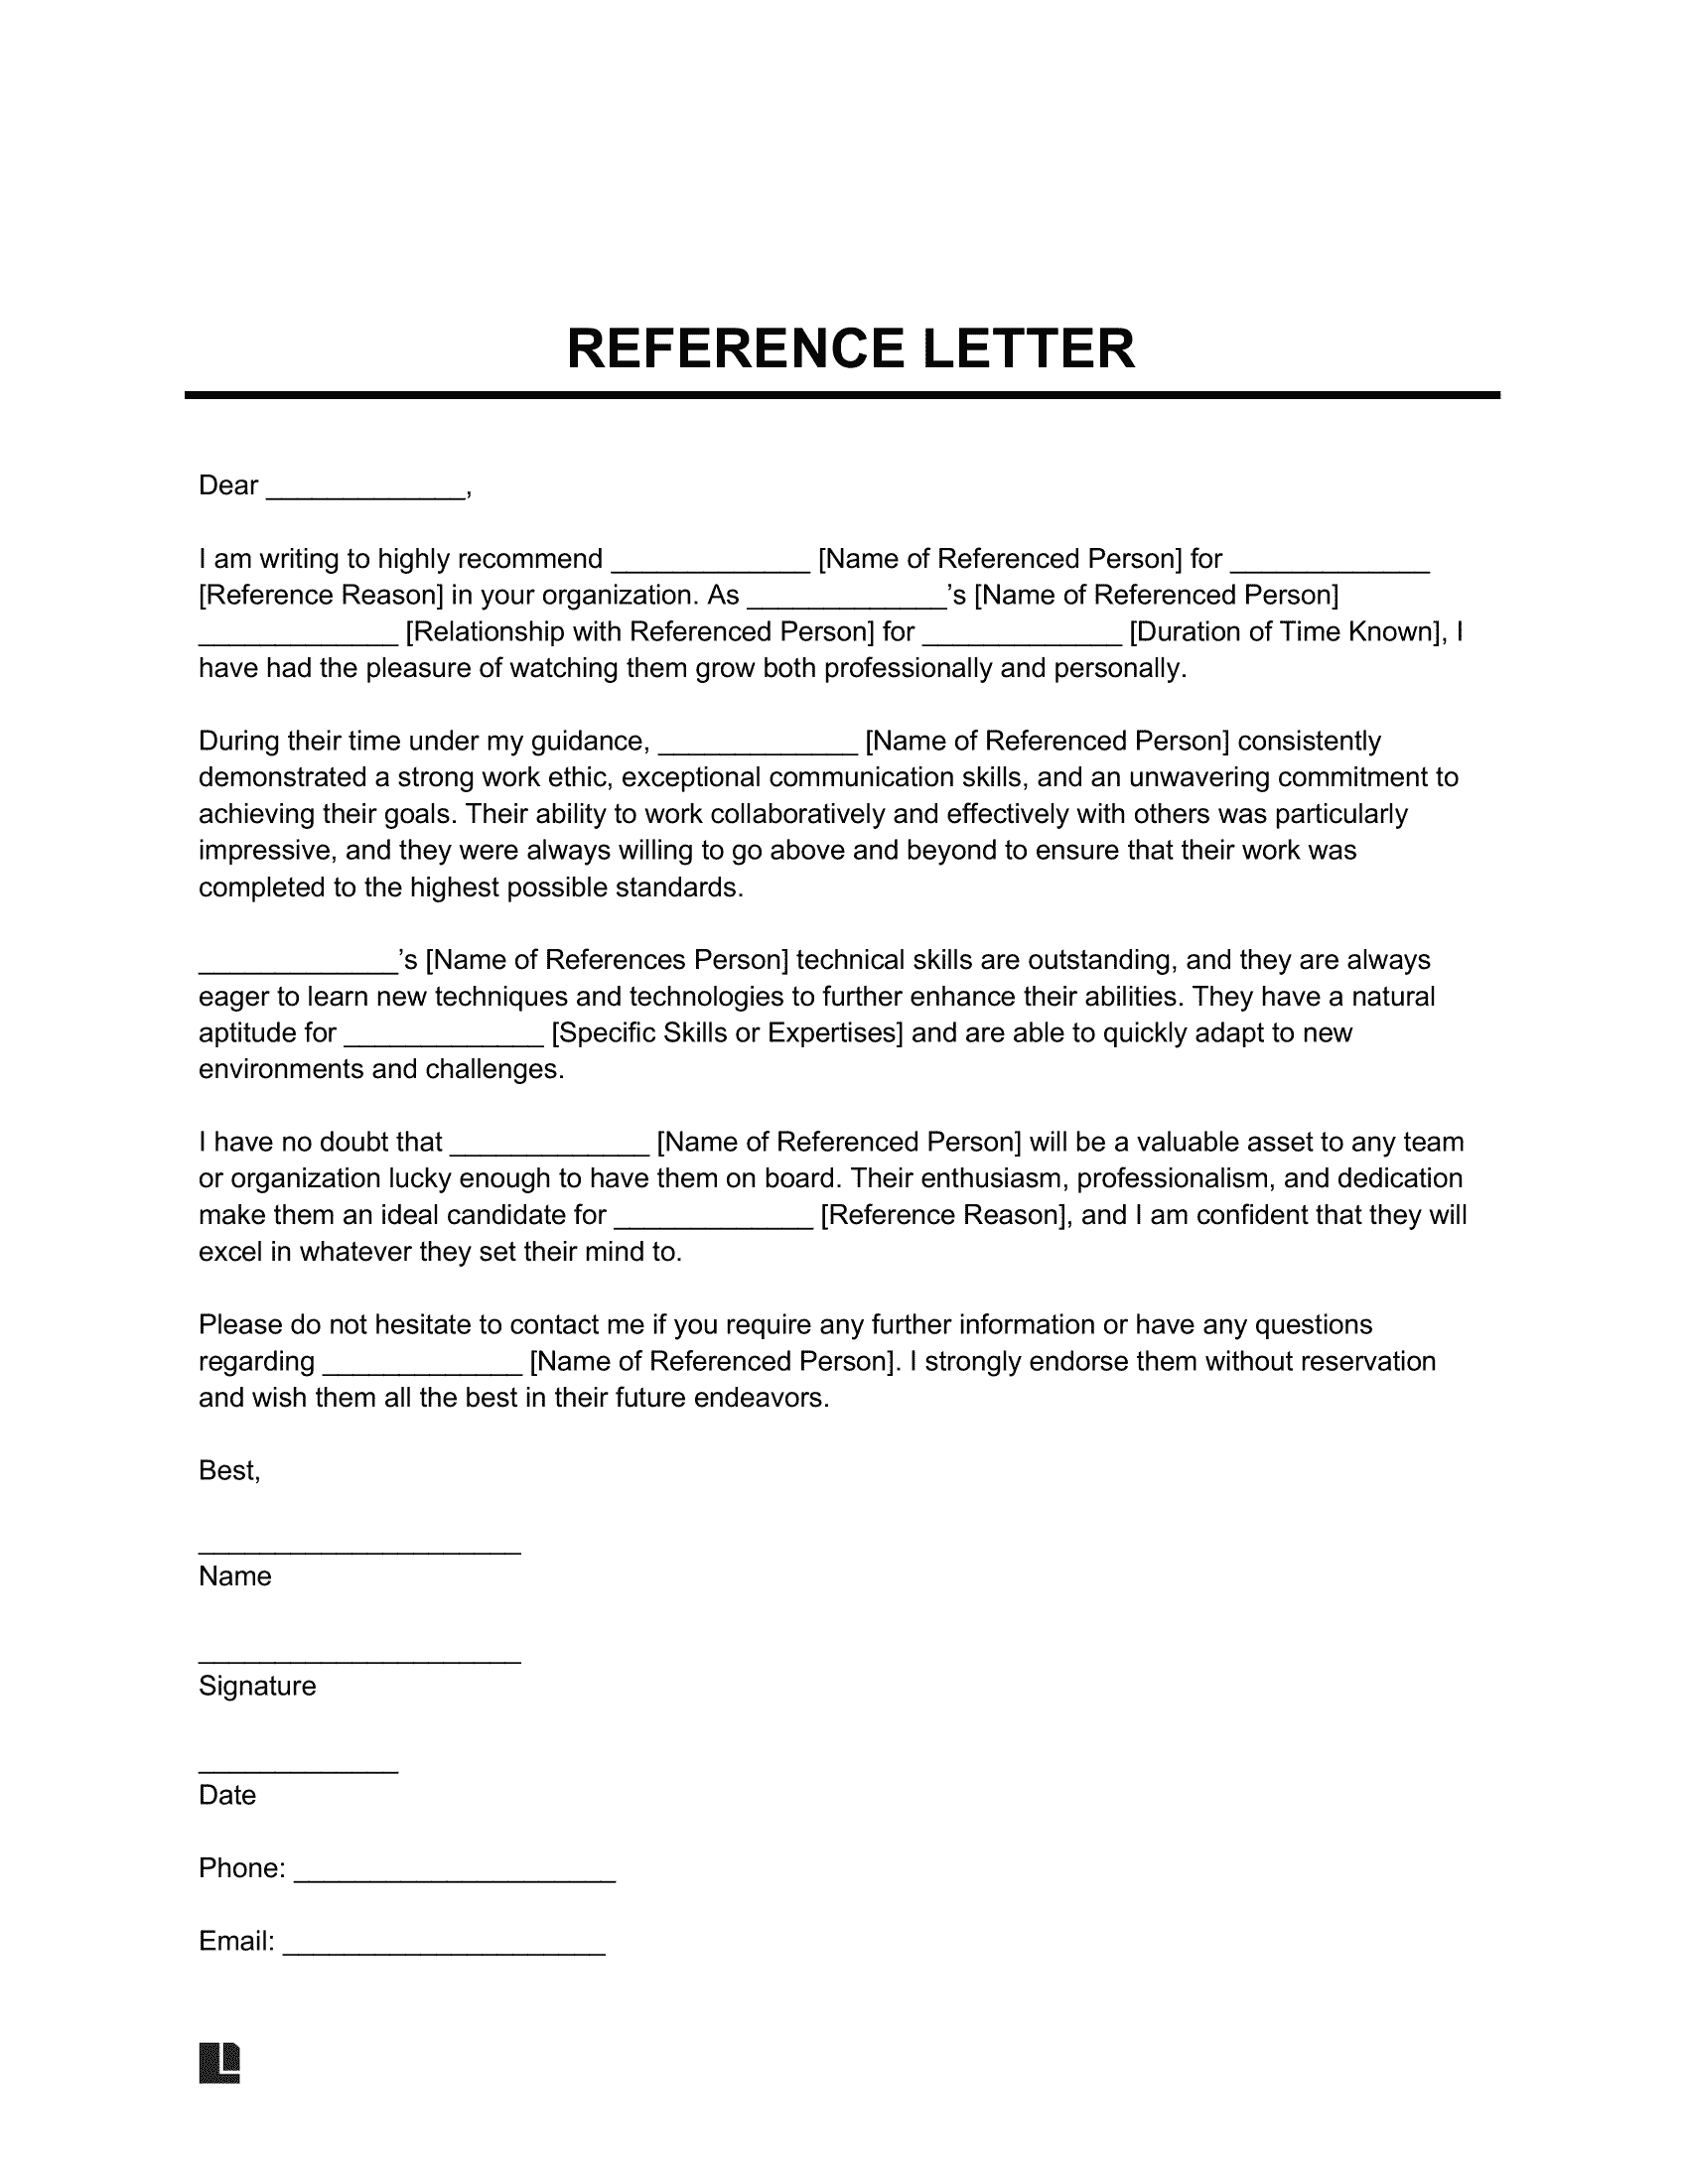 Reference Letter Template